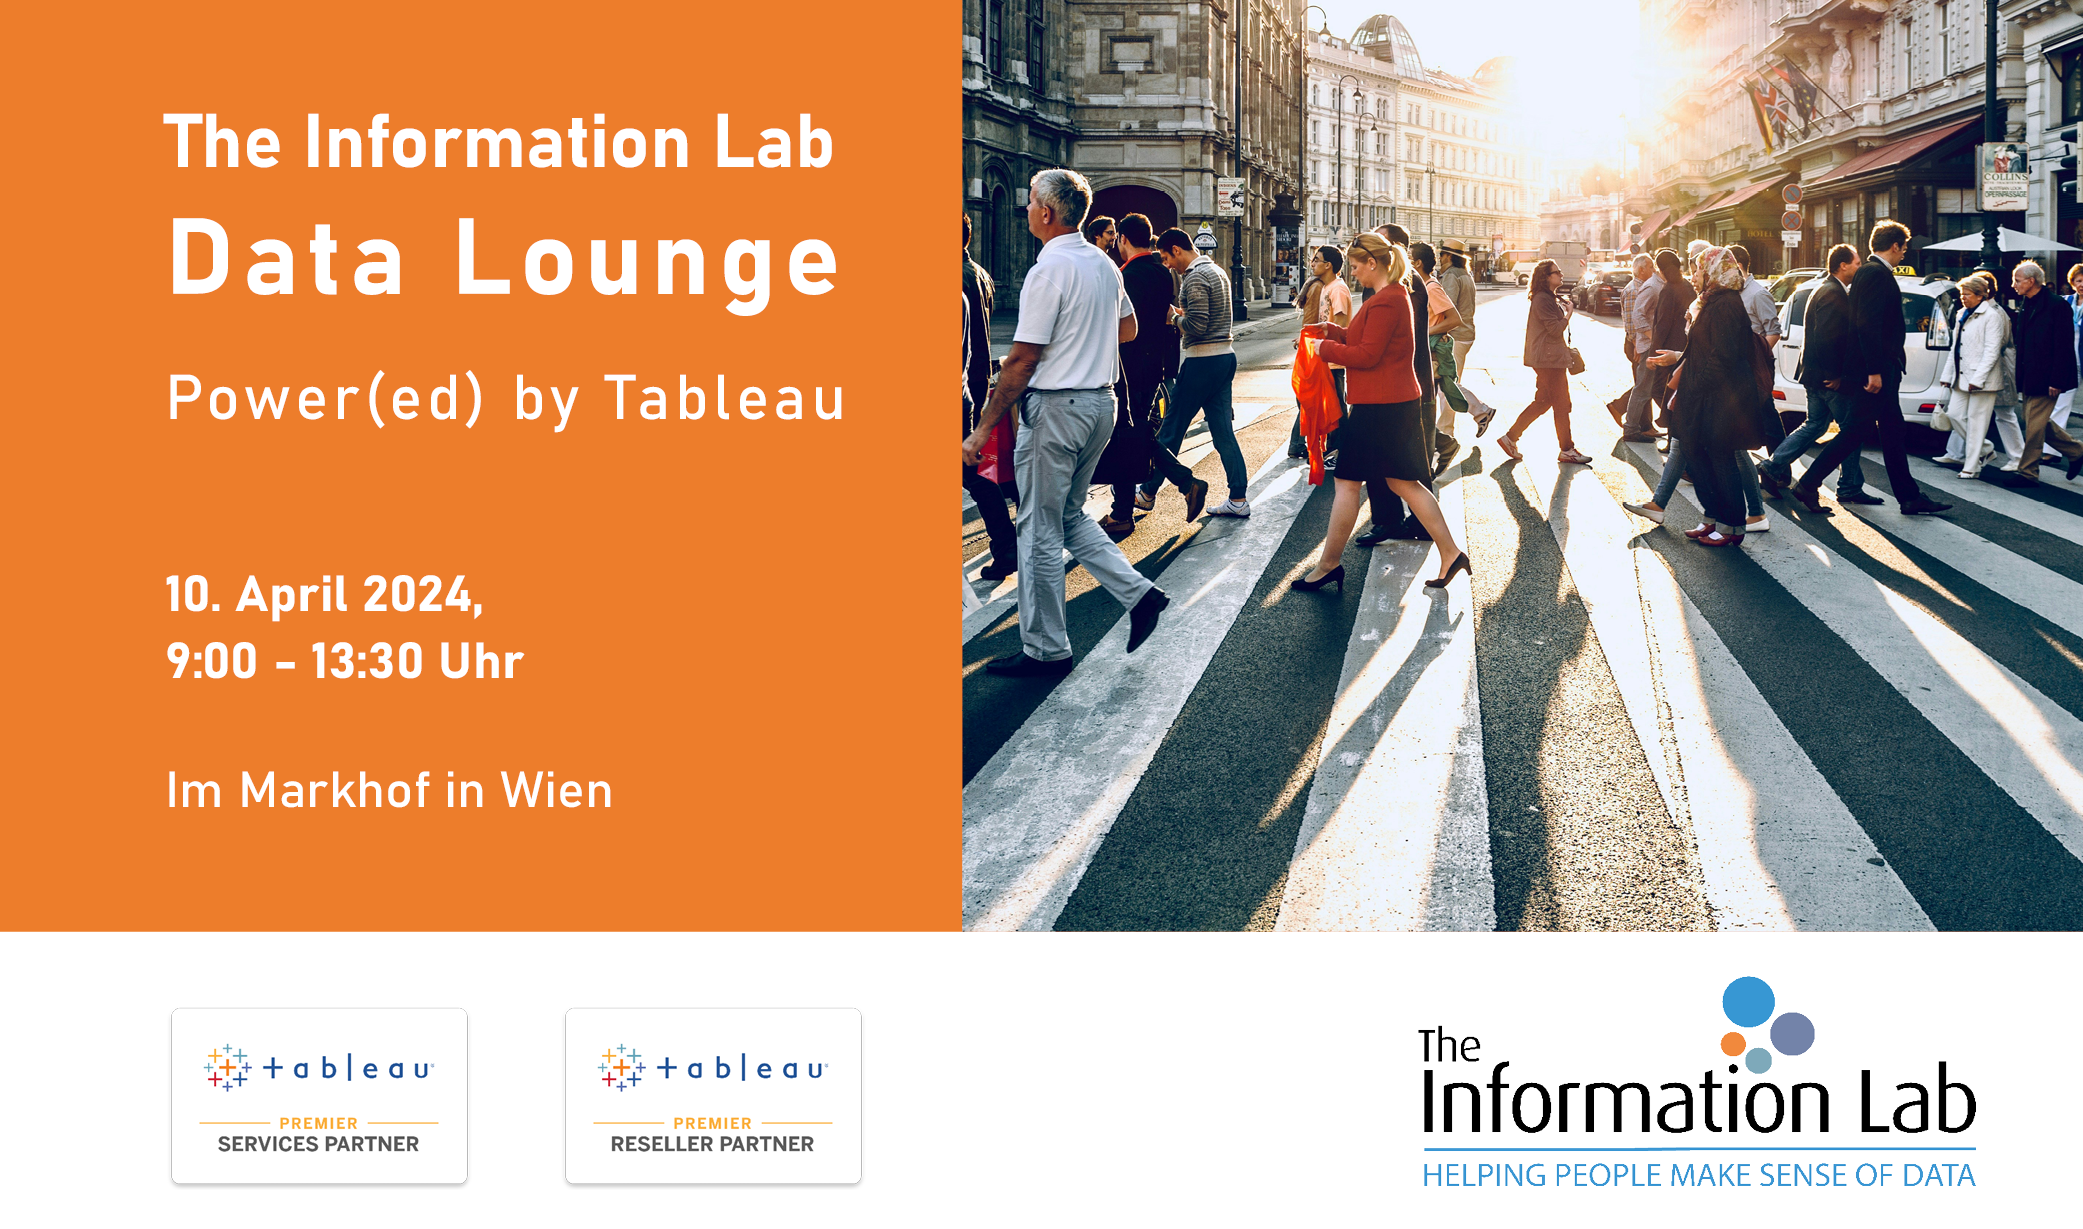 The Information Lab Data Lounge – Power(ed) by Tableau